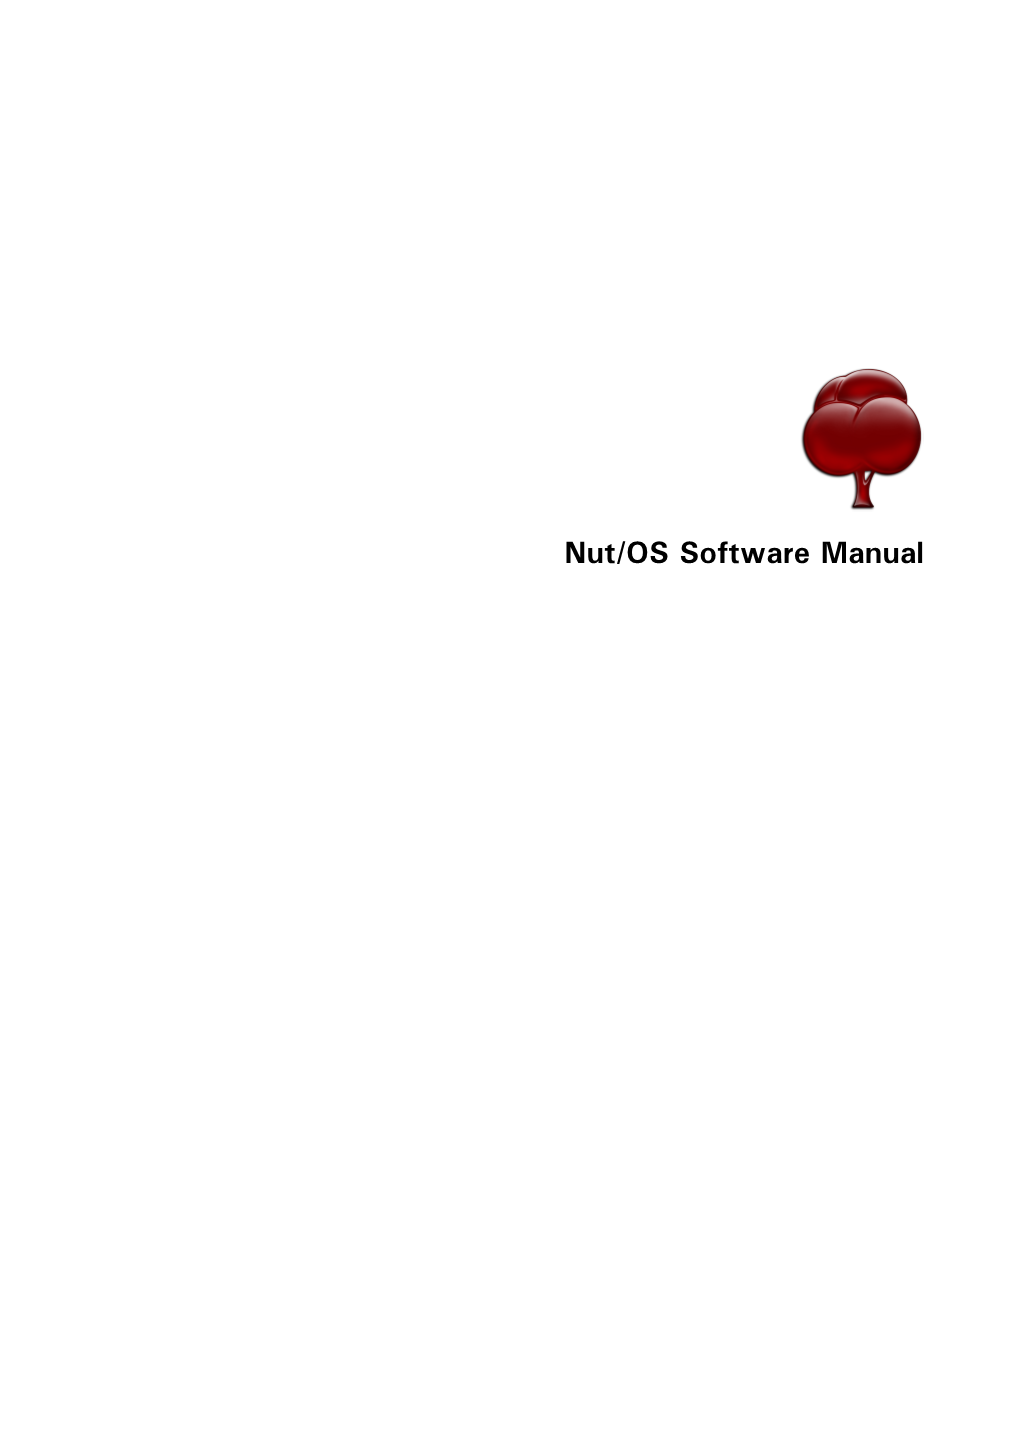 Nut/OS Software Manual Manual Revision: 2.8 Issue Date: July 2009 Copyright 2001-2009 by Egnite Gmbh All Rights Reserved